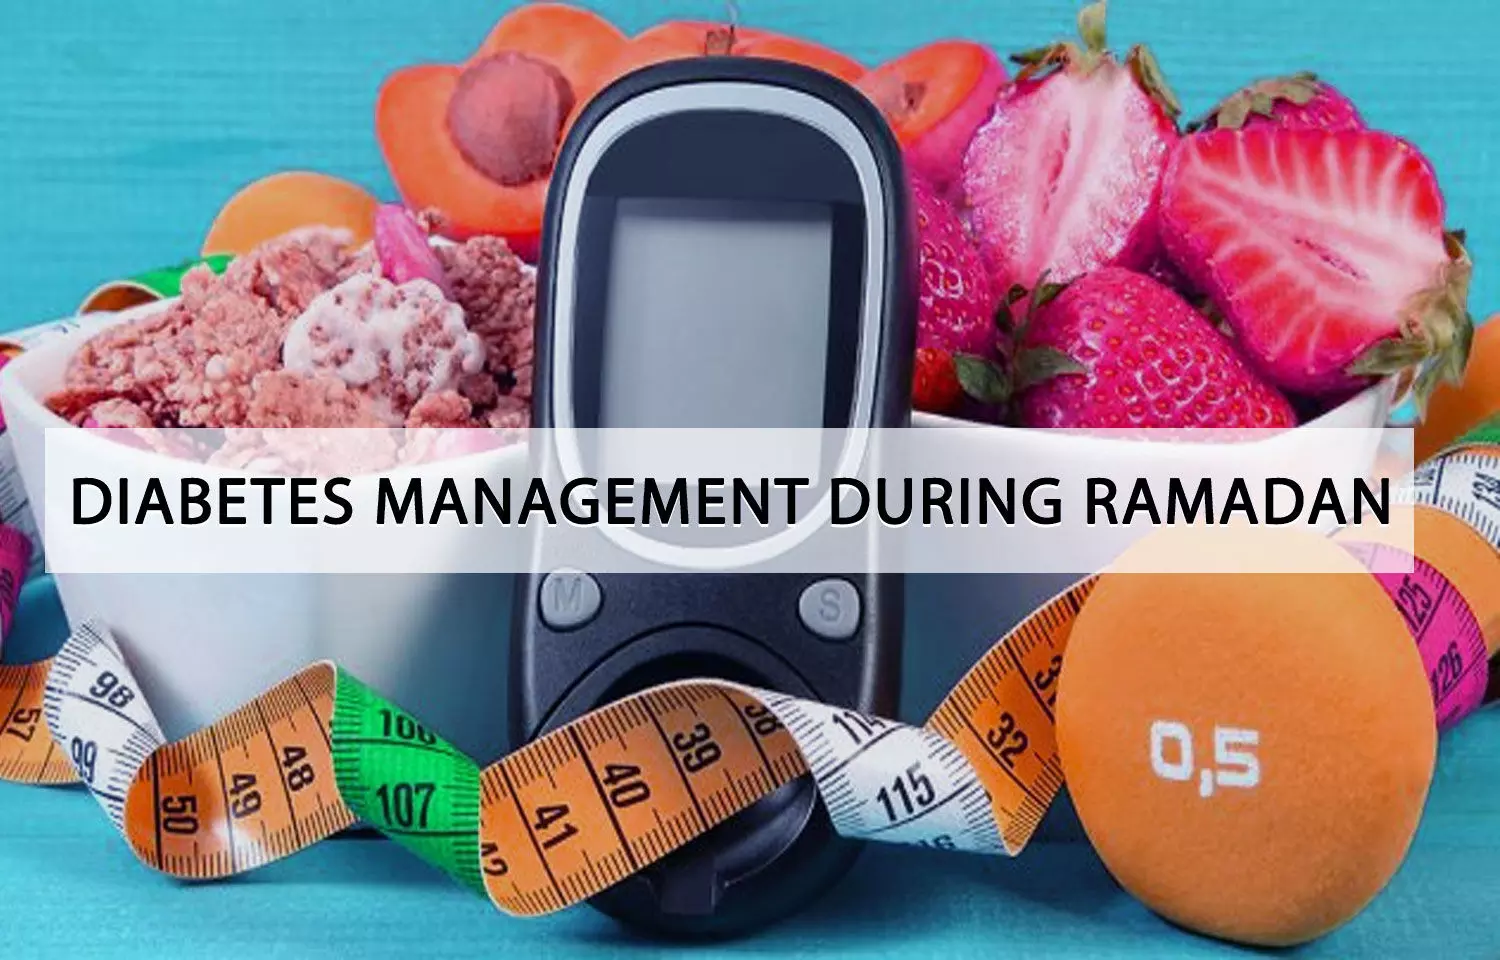 Gliclazide XR effective and safe in diabetic Indian Patients fasting during Ramadan, shows latest Study